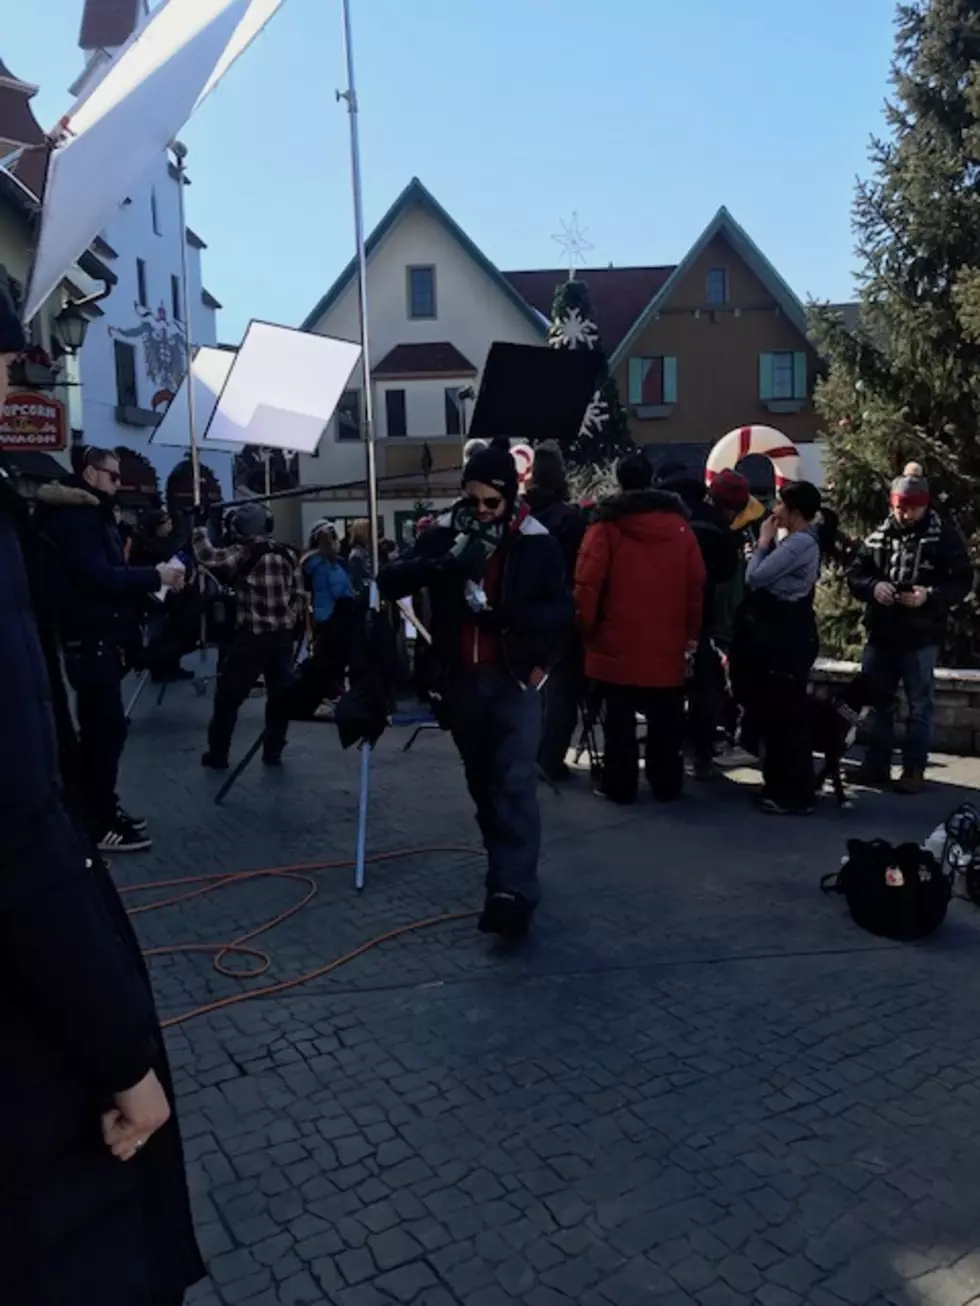 Christmas Movie Filmed in Frankenmuth Premieres Tonight